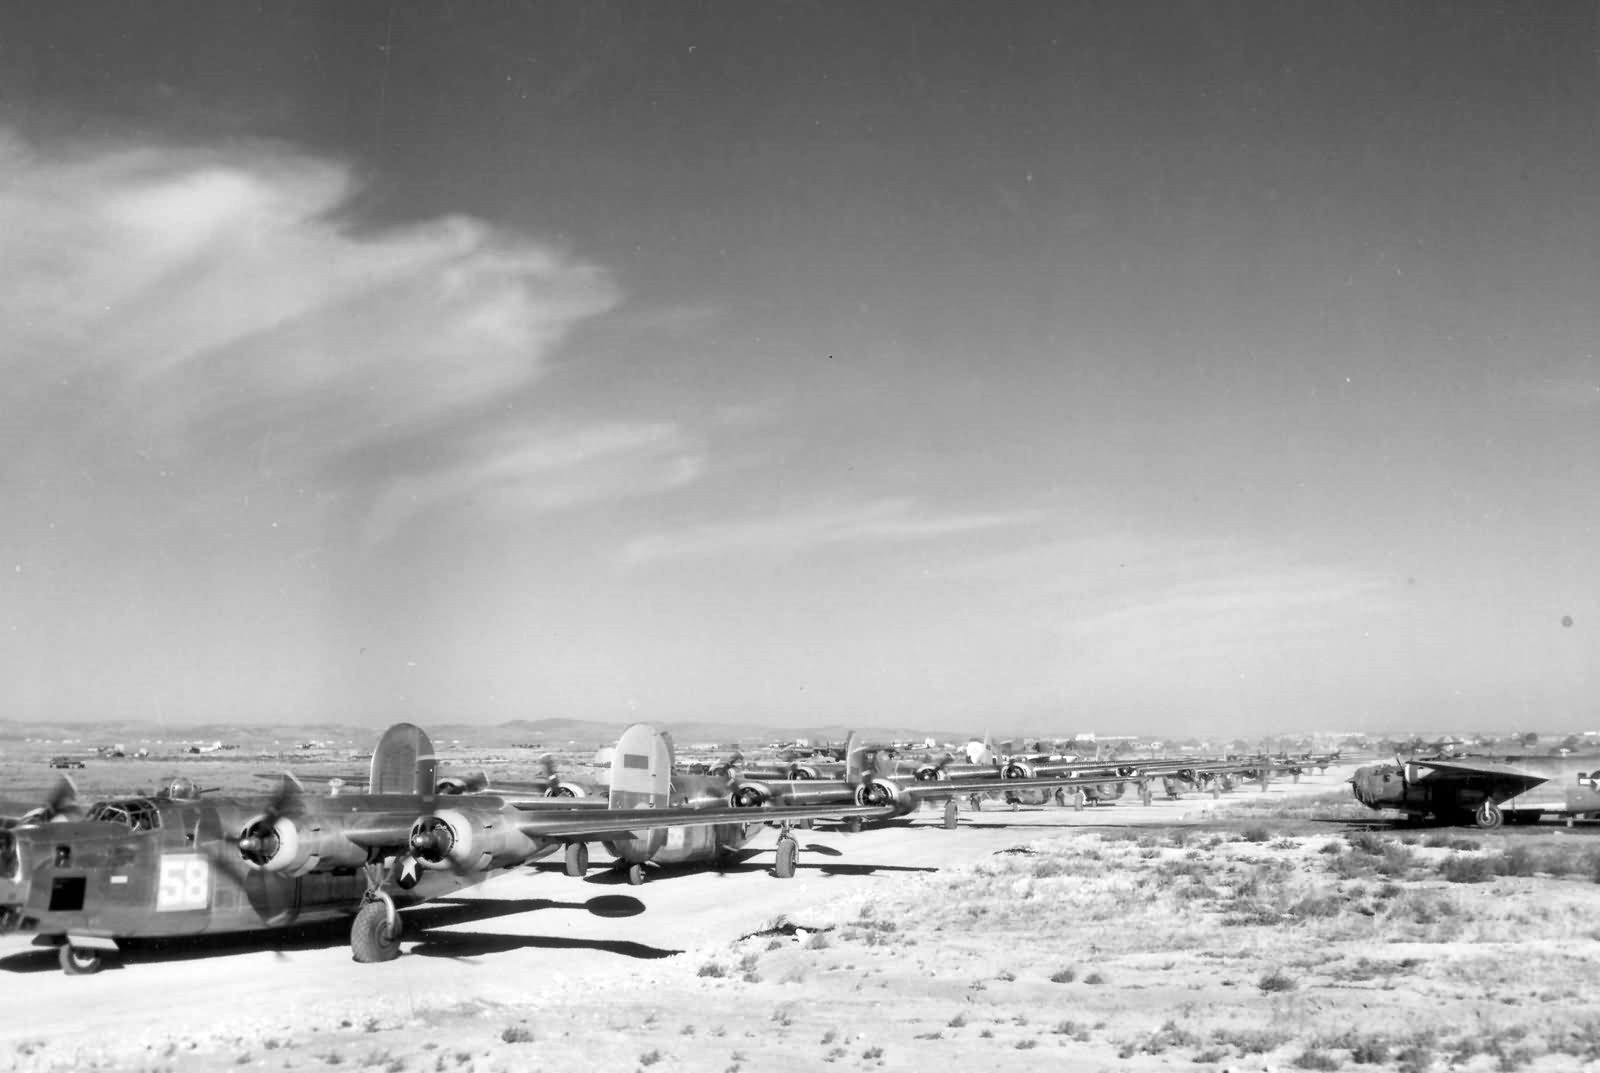 Ten B-24 Liberators of the 451st Bomb Group line up for take-off from Telergma, Algeria bound for their new base at Gioia del Colle, Italy, 20 Jan 1944.